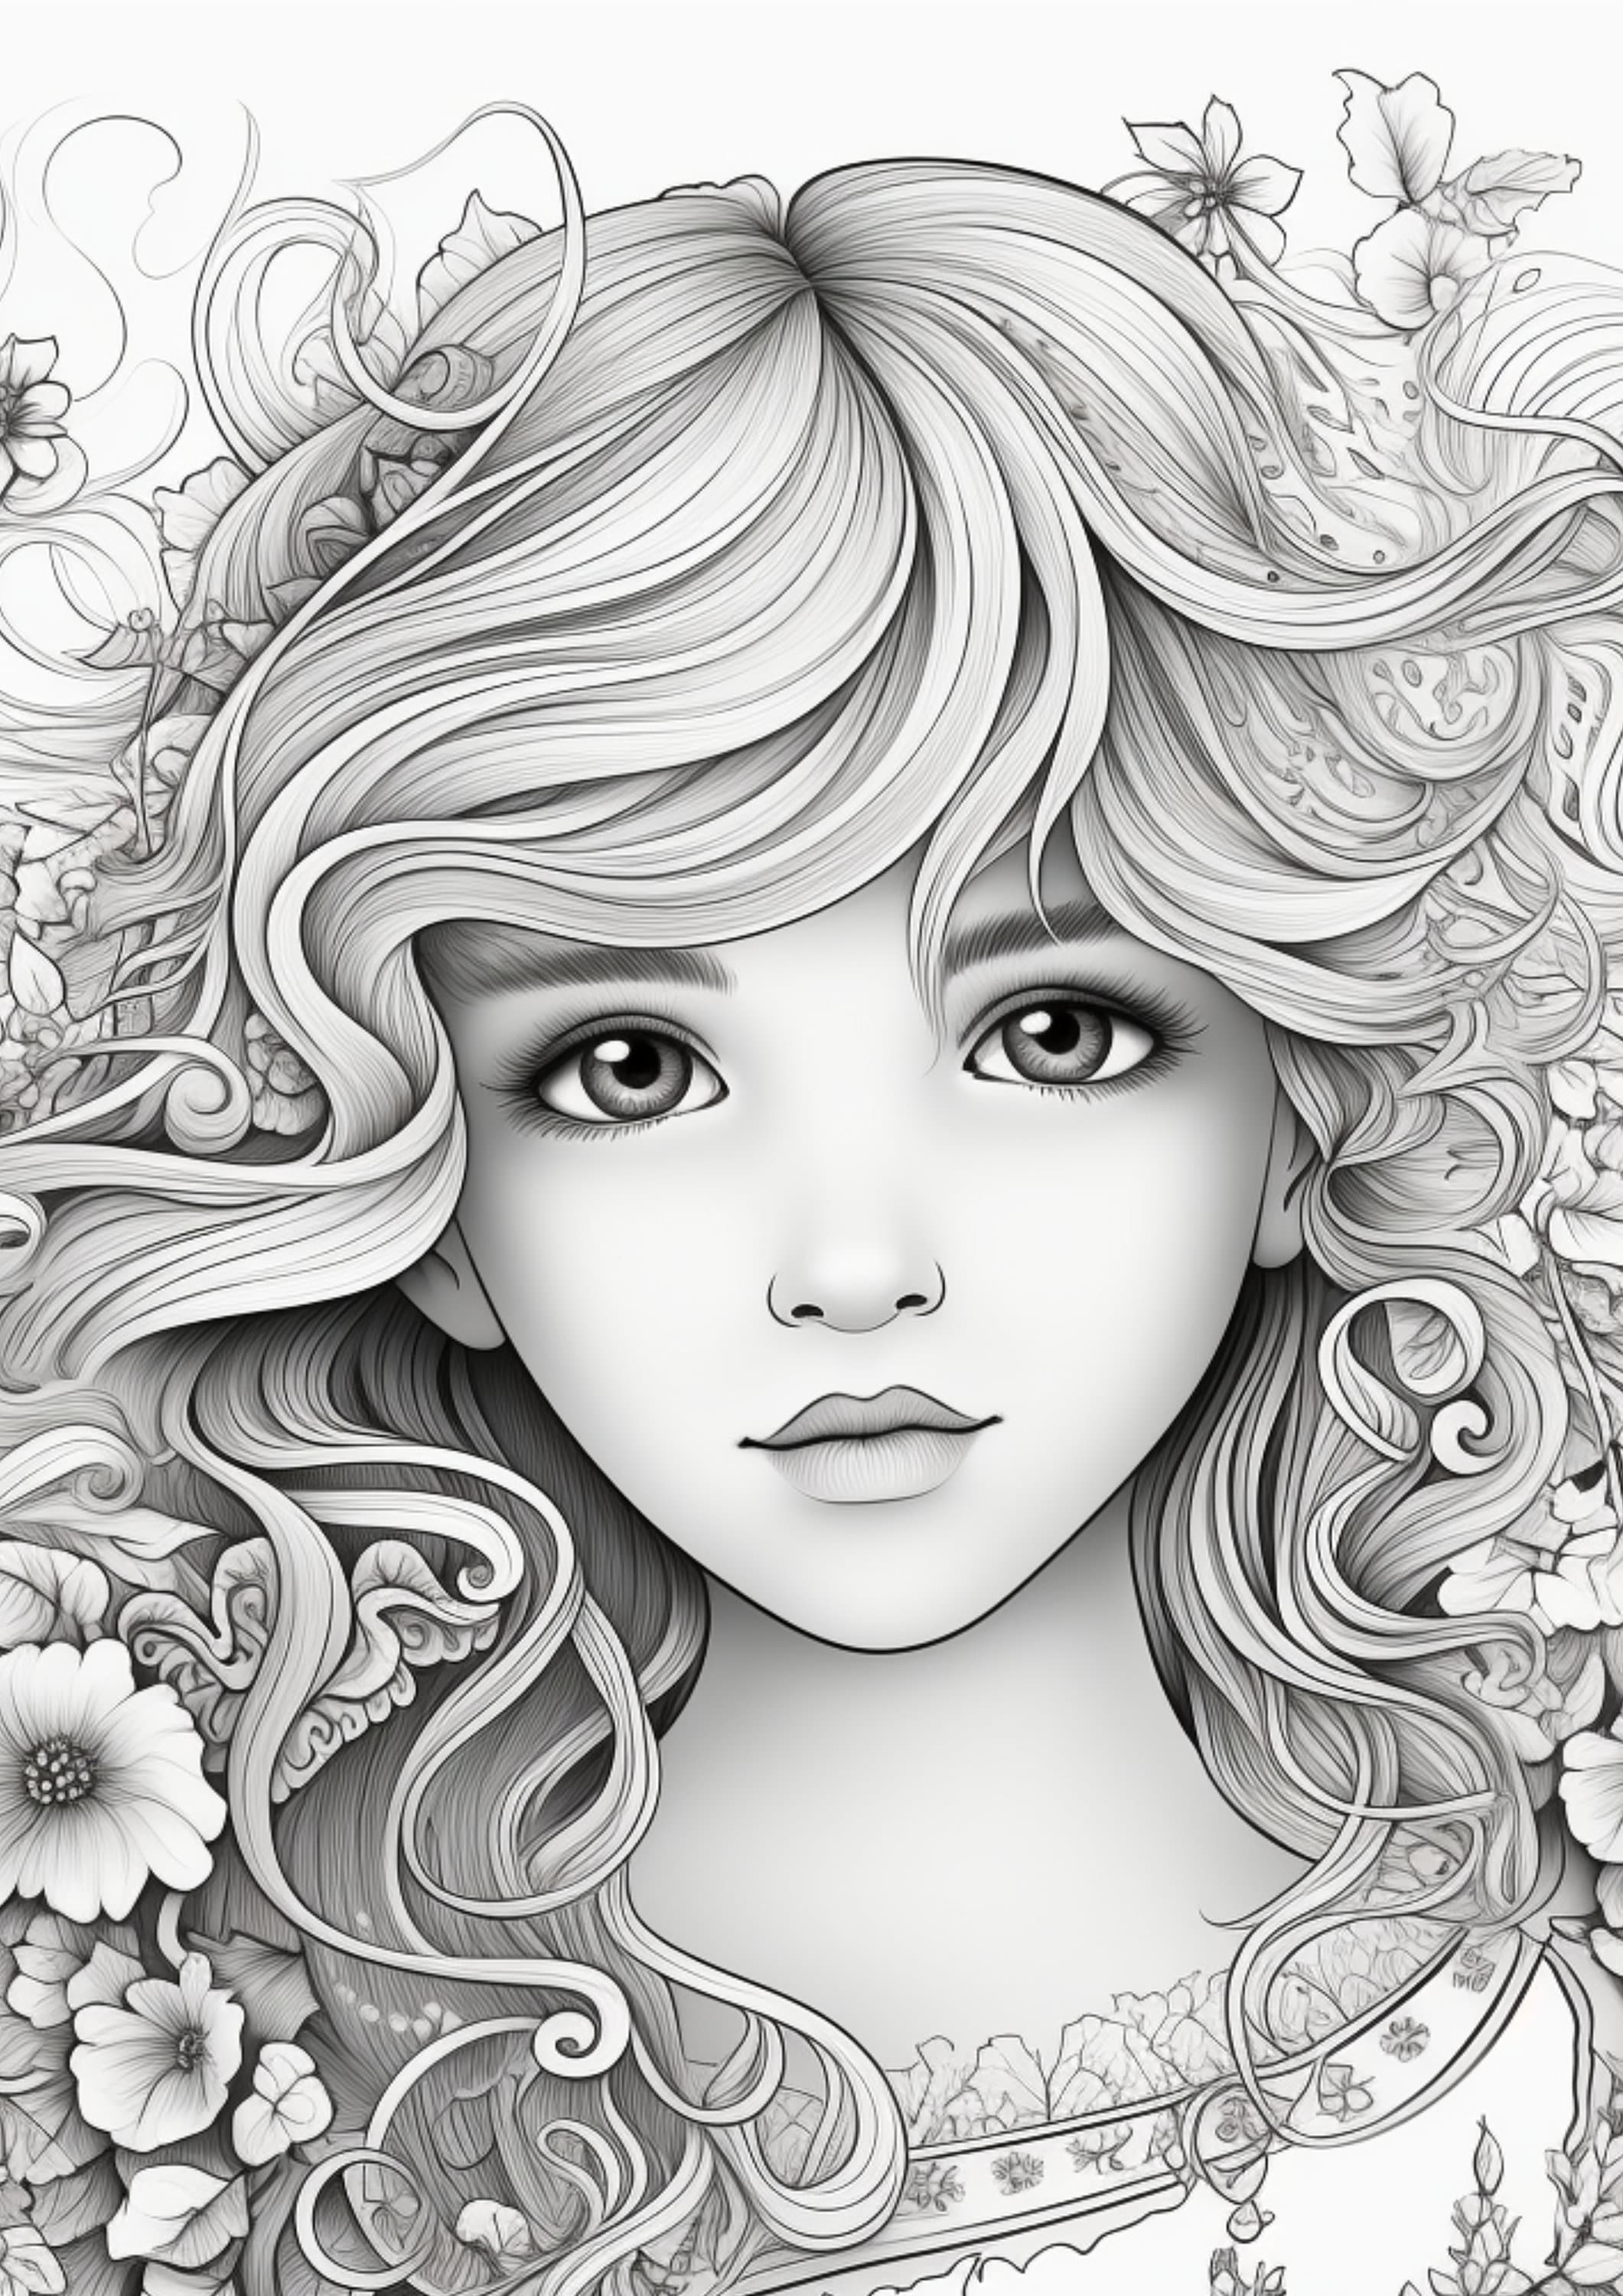  Flower Girls: Coloring Book For Adults and Teens Featuring  Unique Portrait Illustrations with Detailed Floral Designs for Relaxation  and Stress Relief (All Books by emzdrawings): 9798472065214: Ziomek,  Emilia, emzdrawings, by, Ziomek